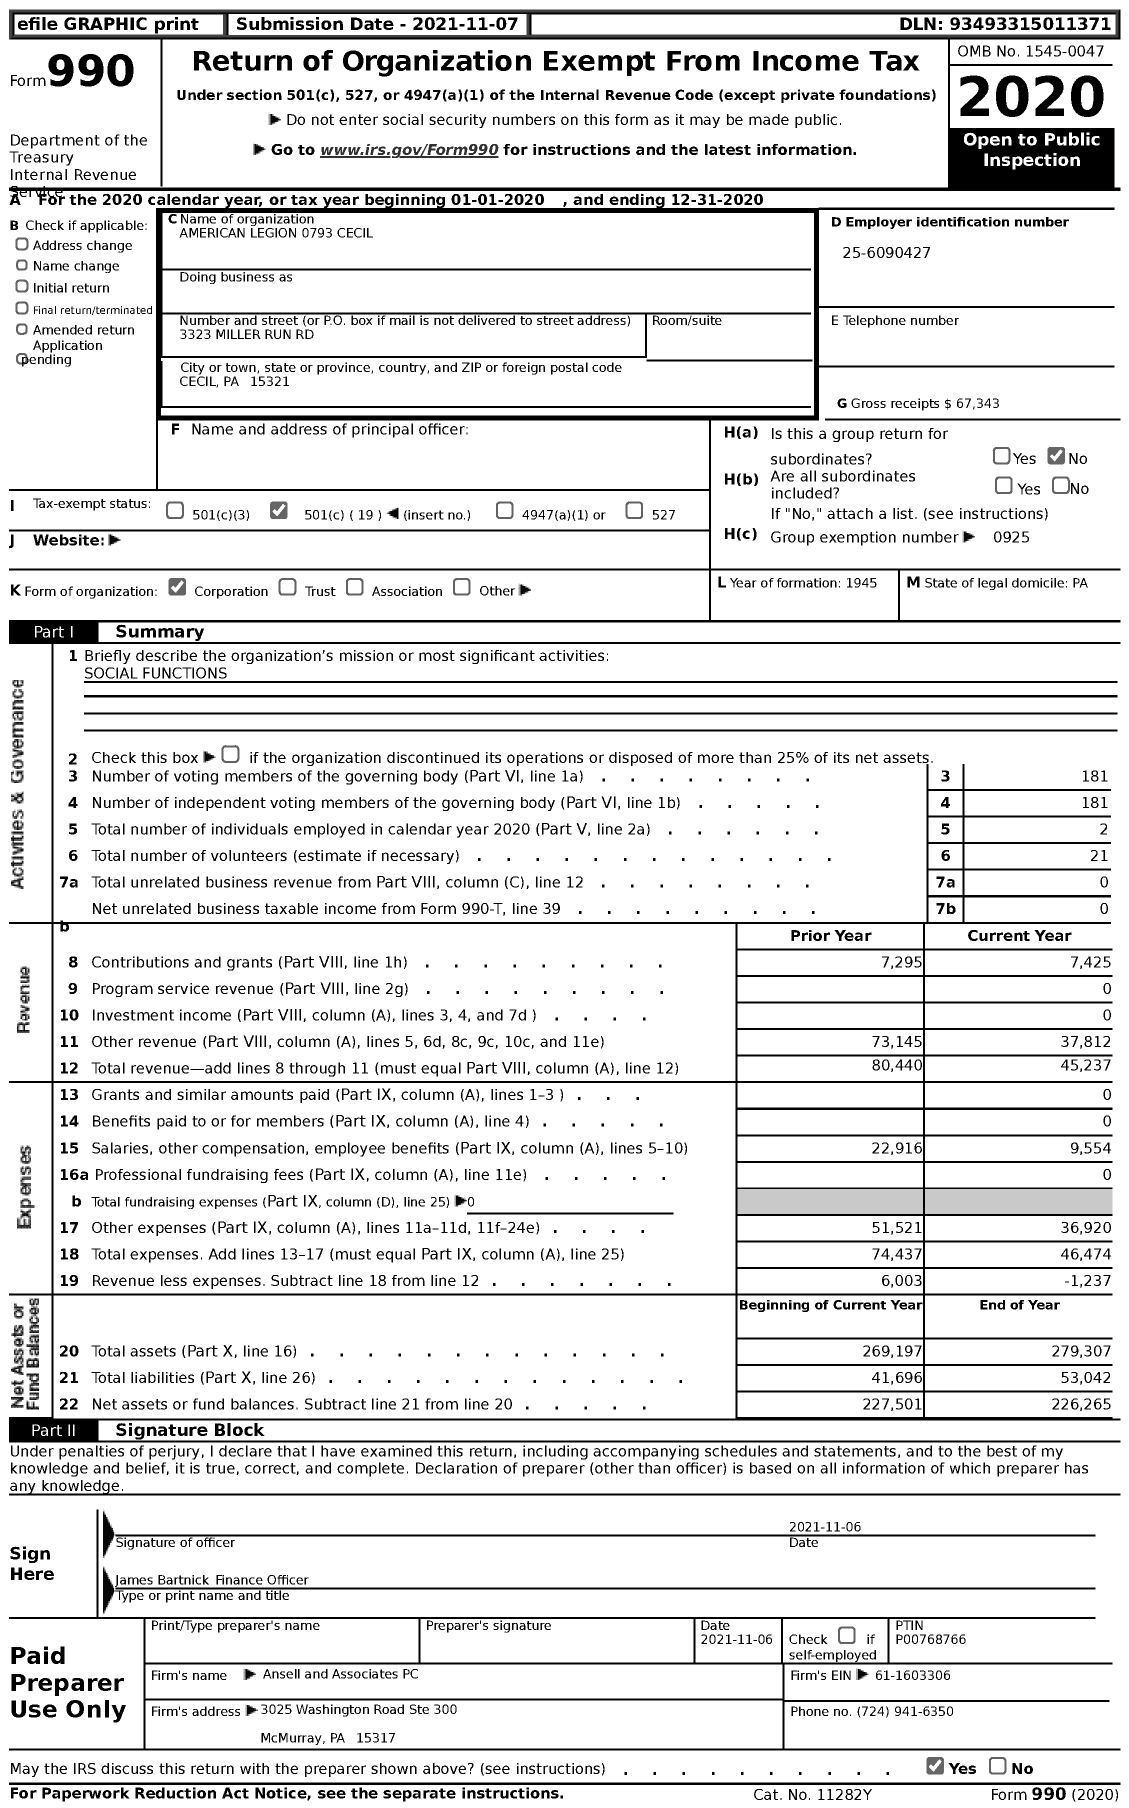 Image of first page of 2020 Form 990 for AMERICAN LEGION - 0793 Cecil